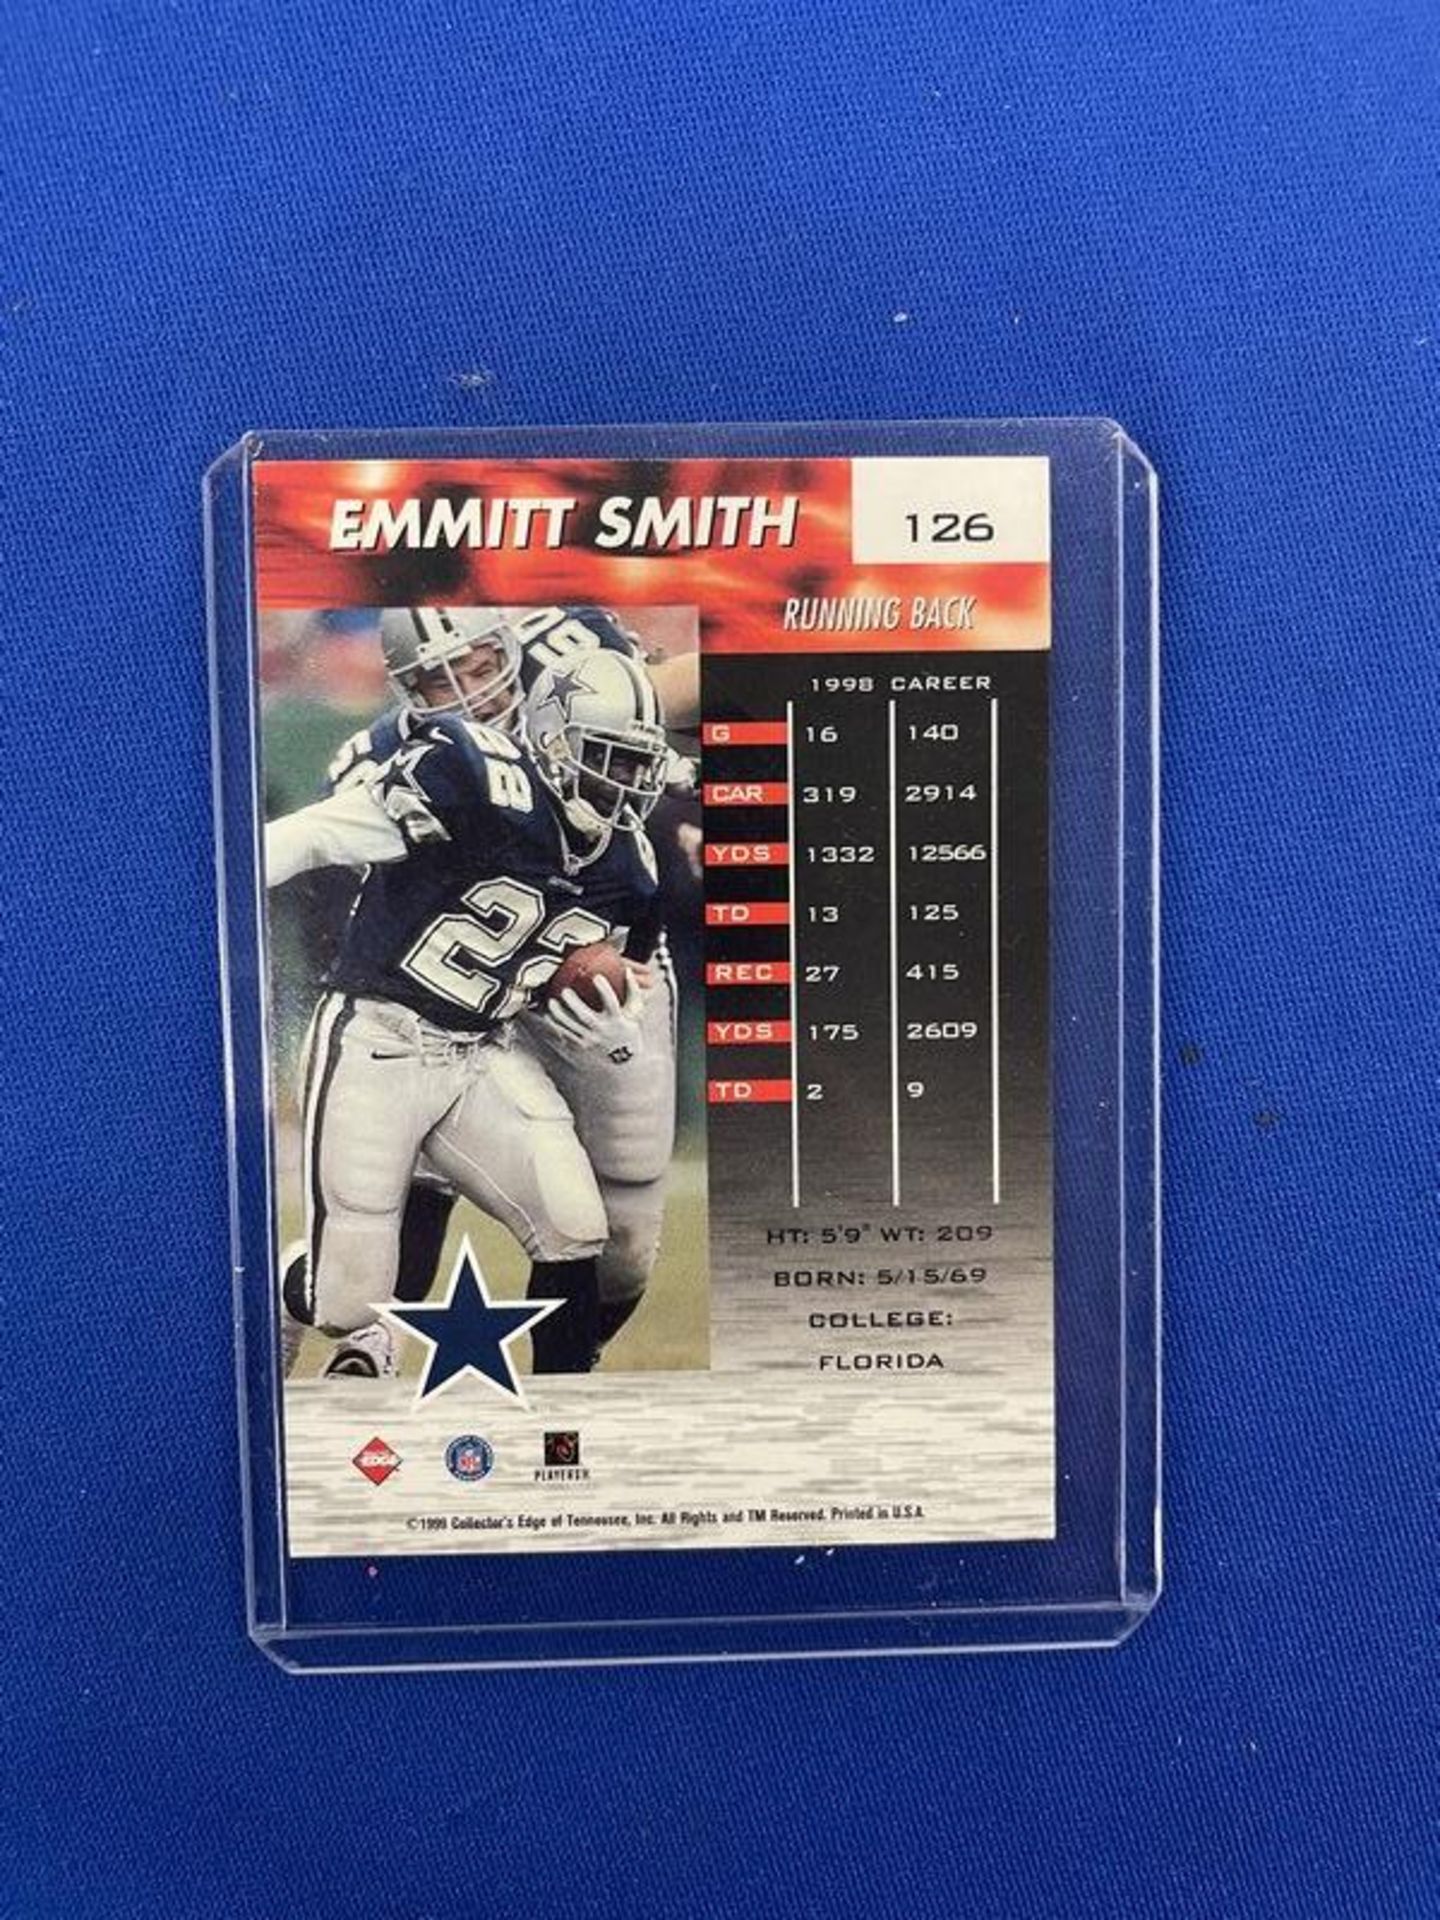 Score Furry Emmitt Smith Millennium Collection Card - Image 2 of 2